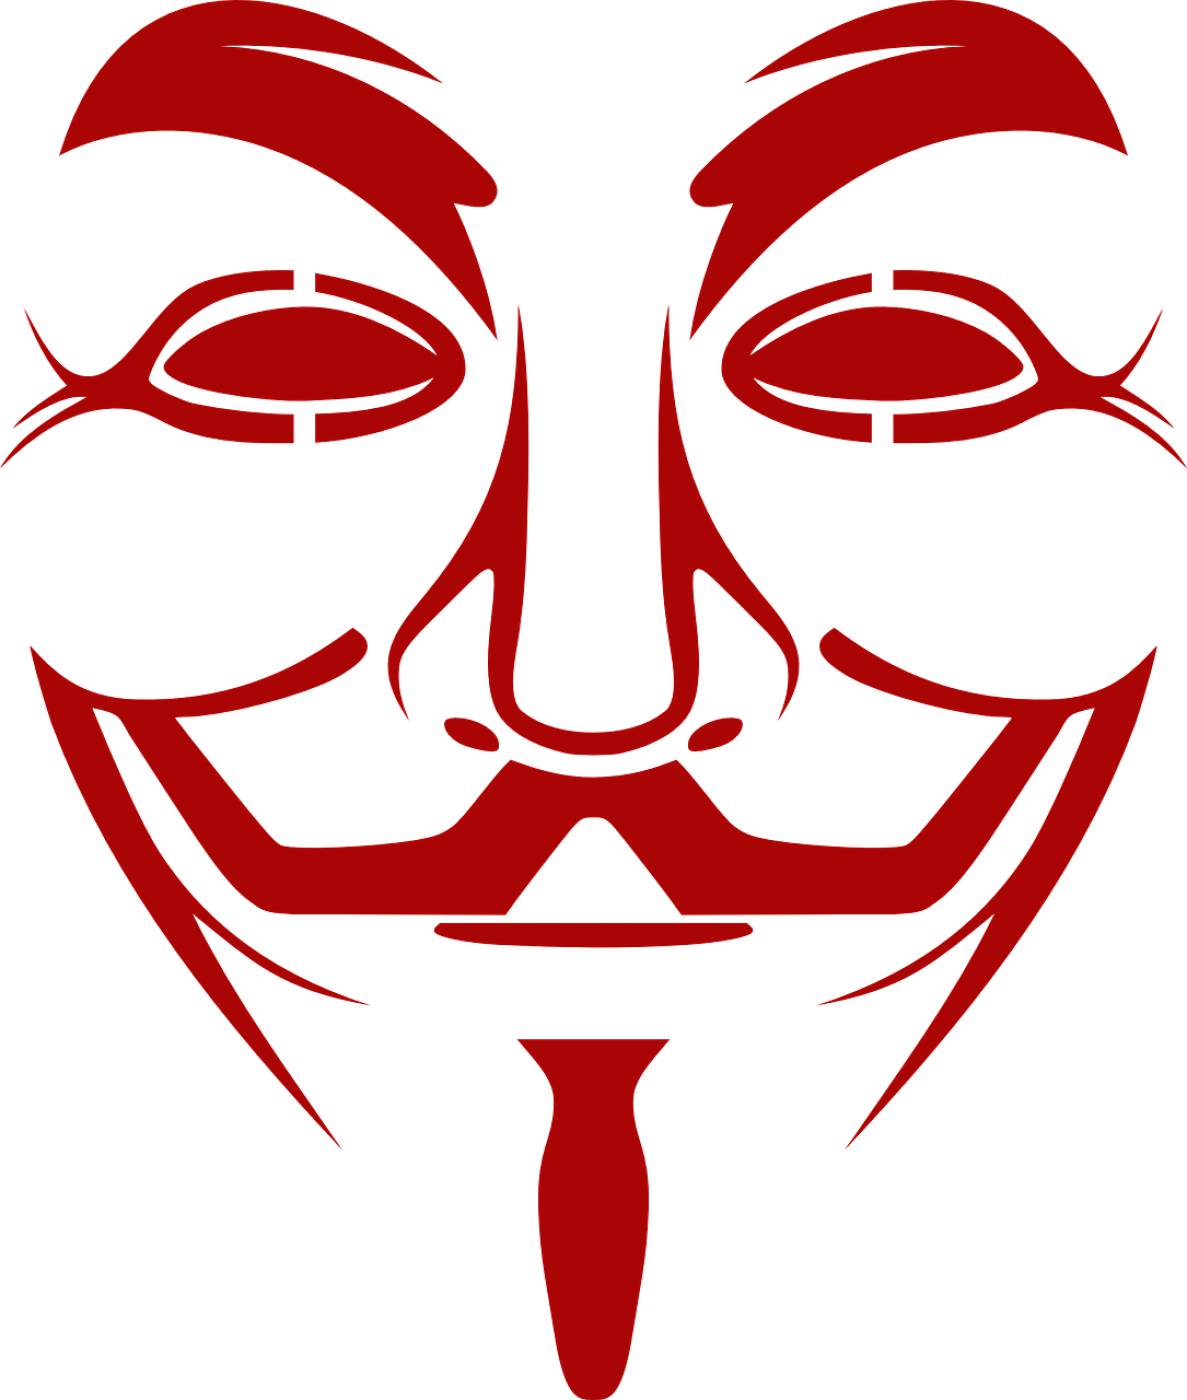 guy fawkes mask anonymous  svg vector